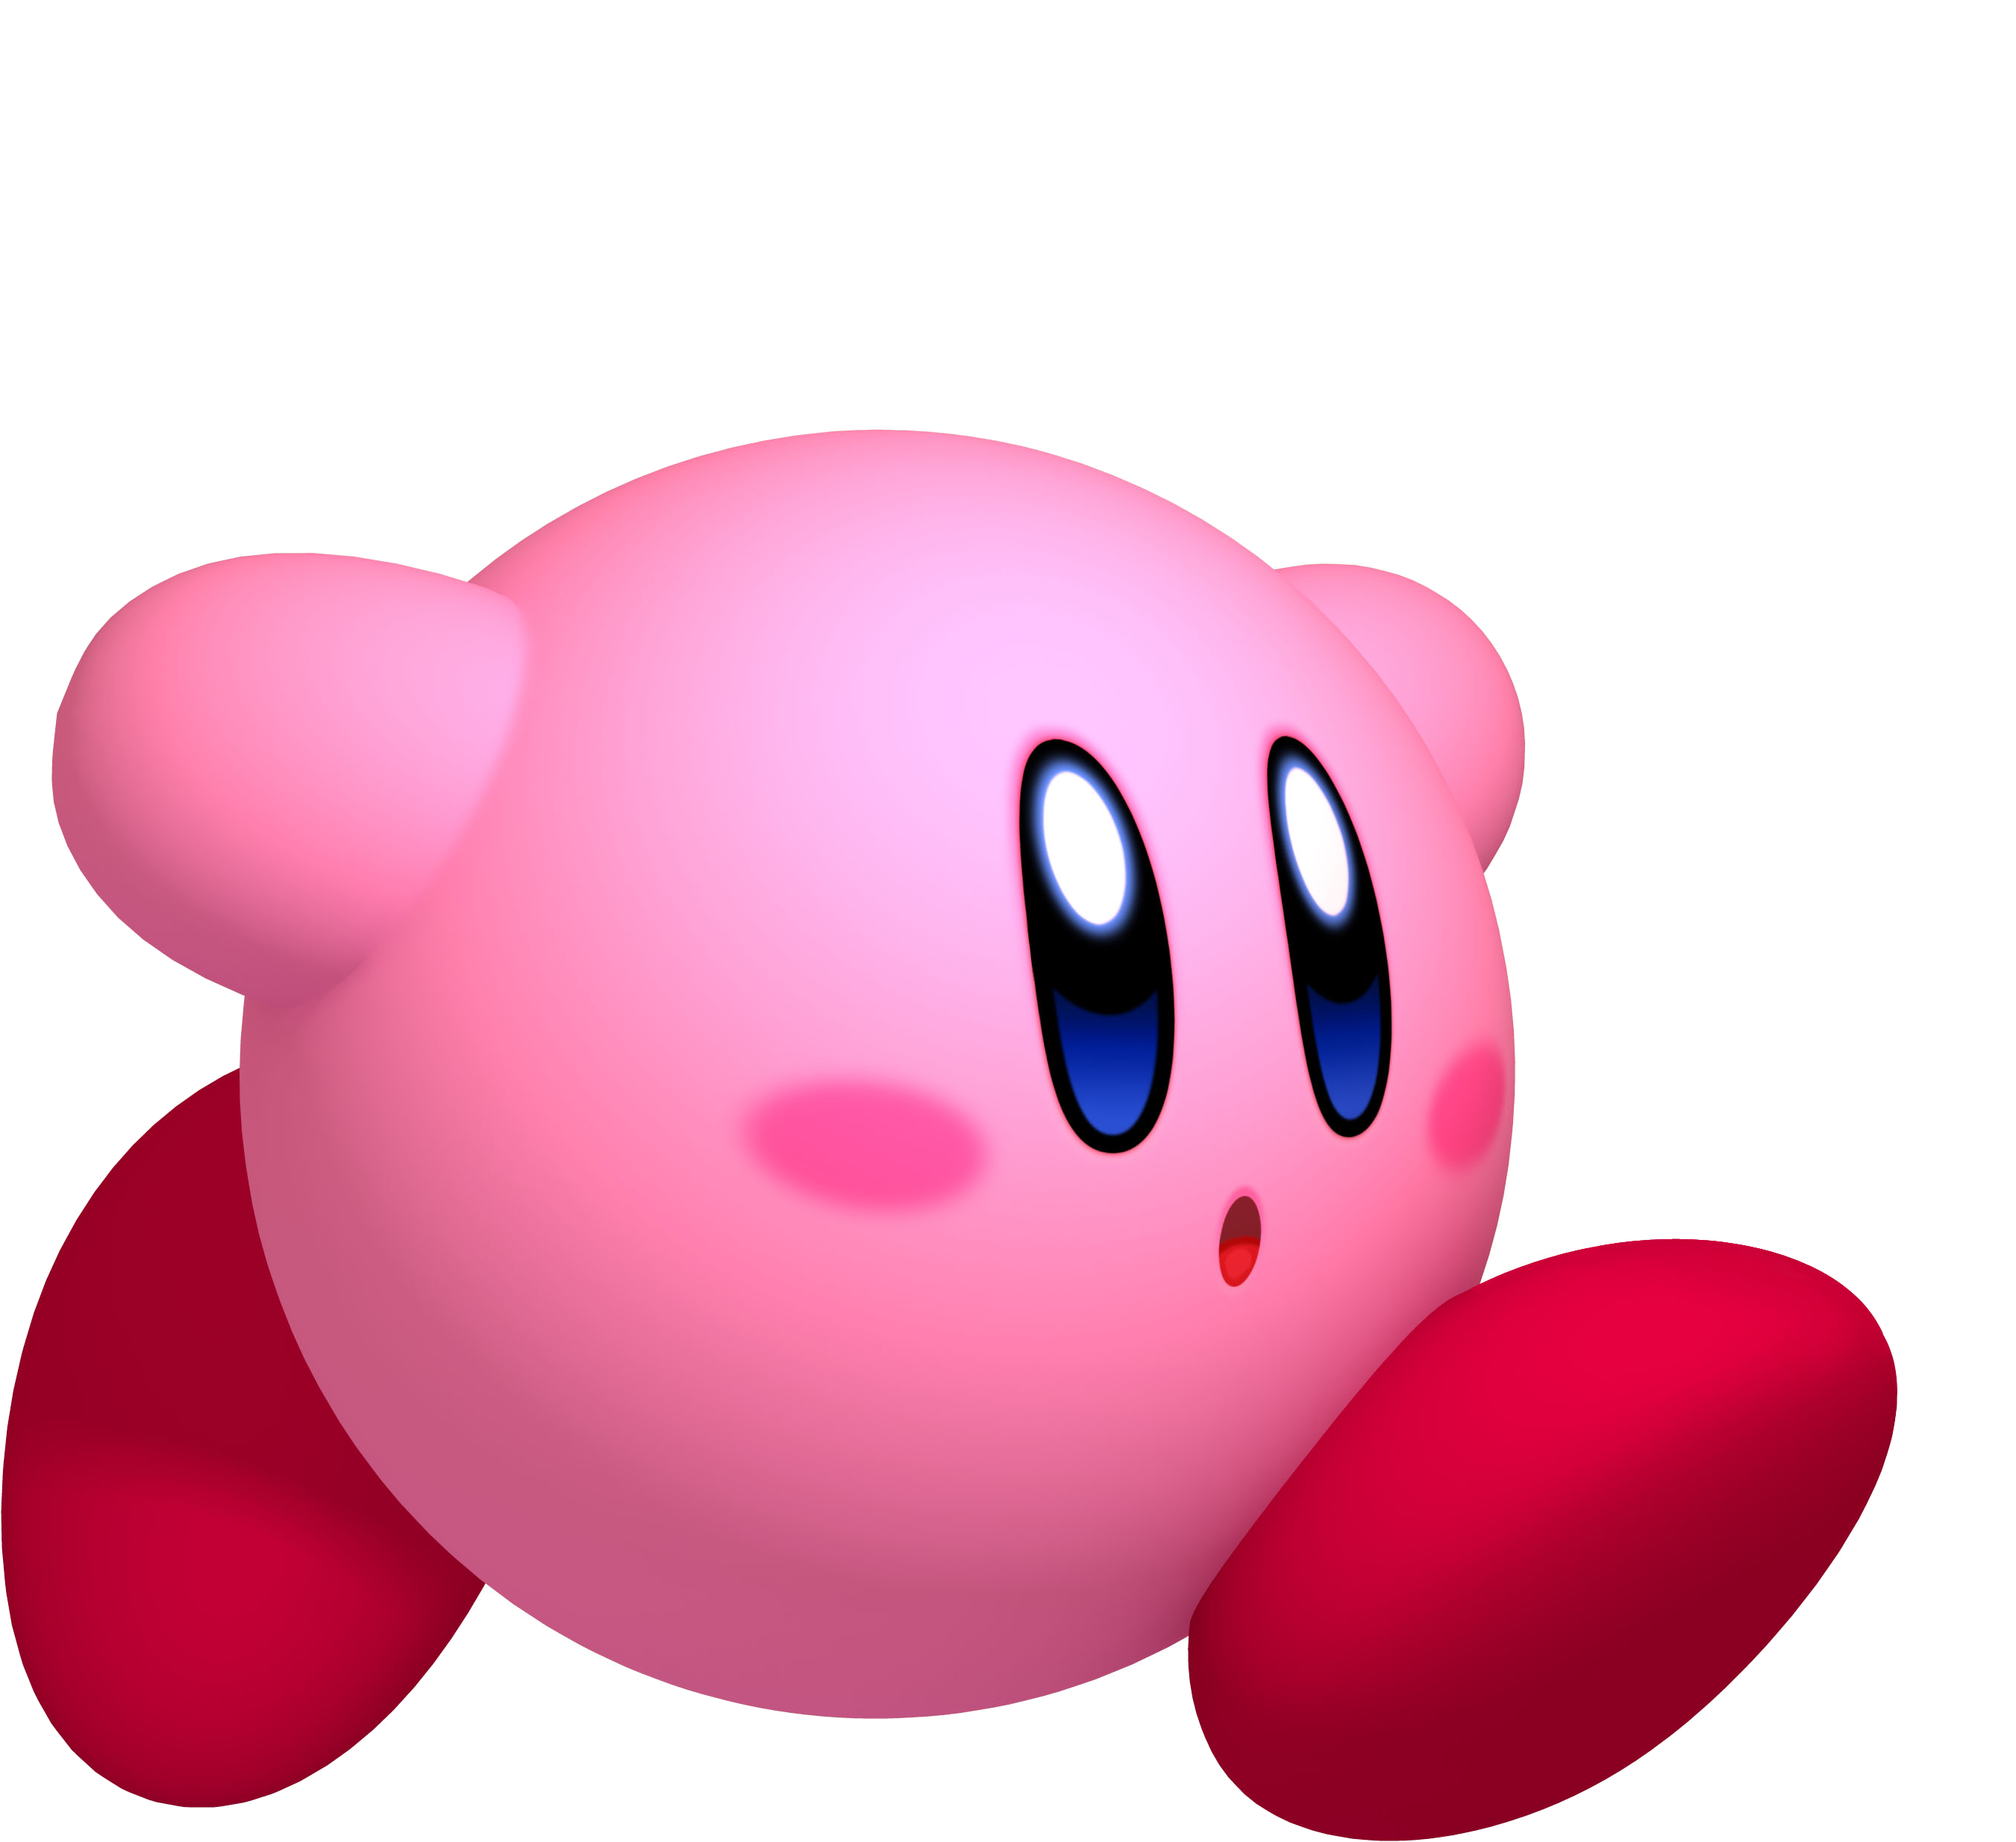 Download Kirby Rtdl Kirby Kirby Return To Dreamland Kirby Png Image With No Background Pngkey Com